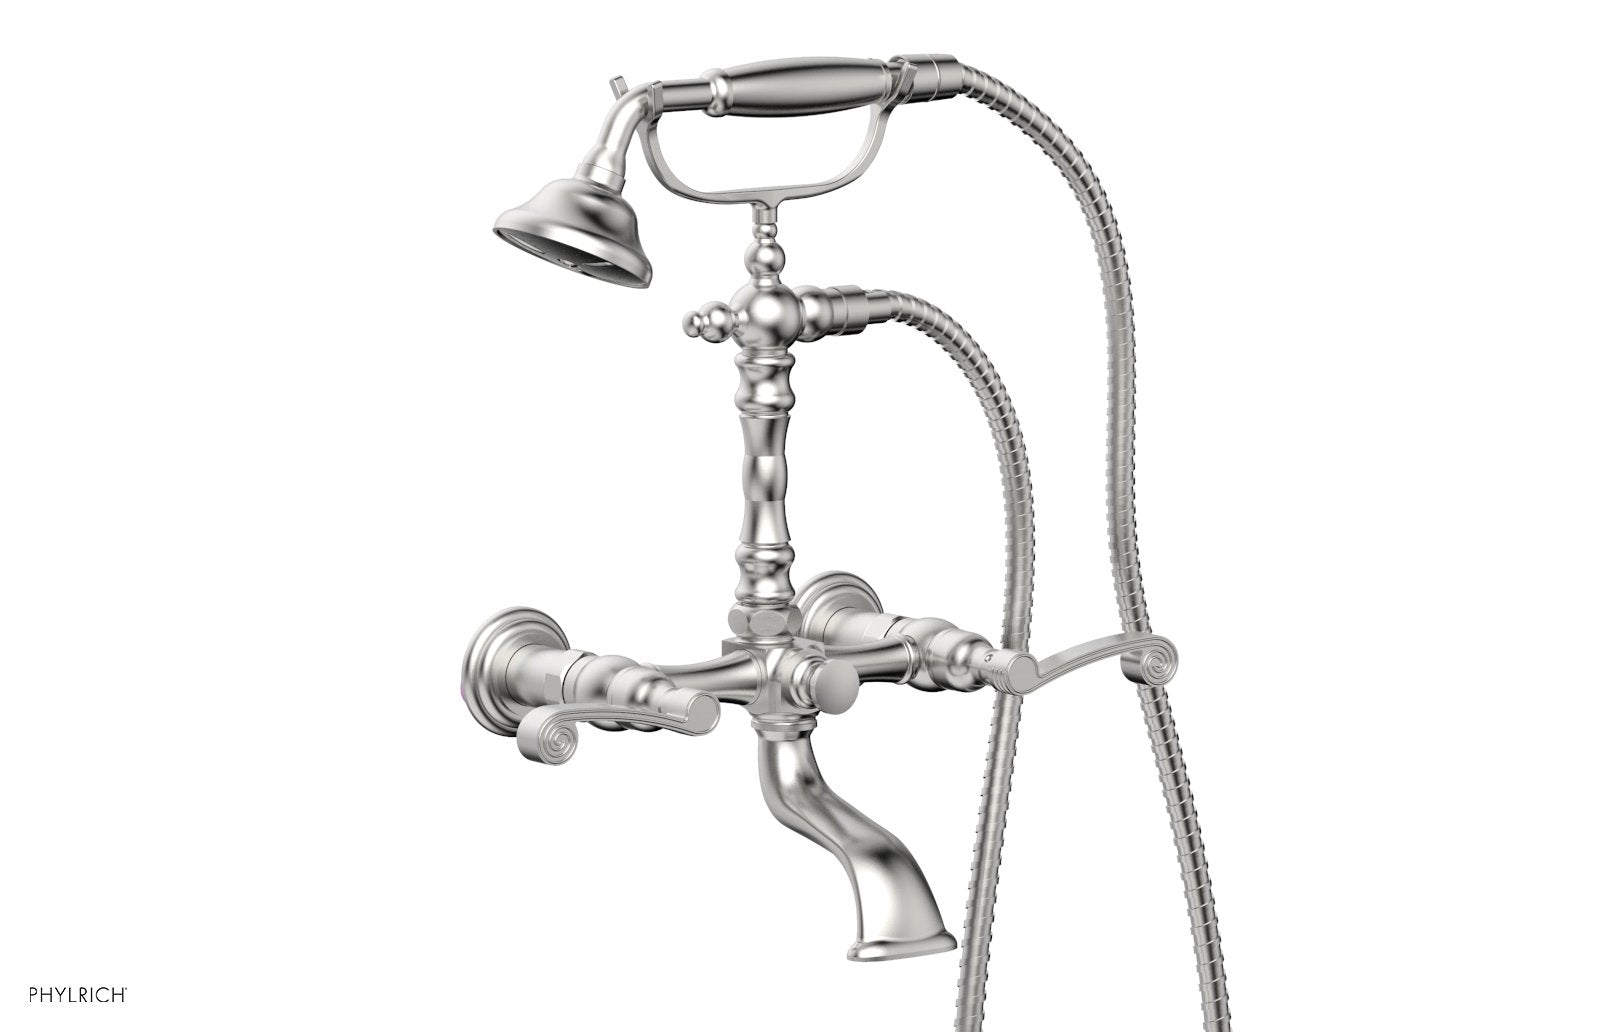 Phylrich 3RING Exposed Tub & Hand Shower